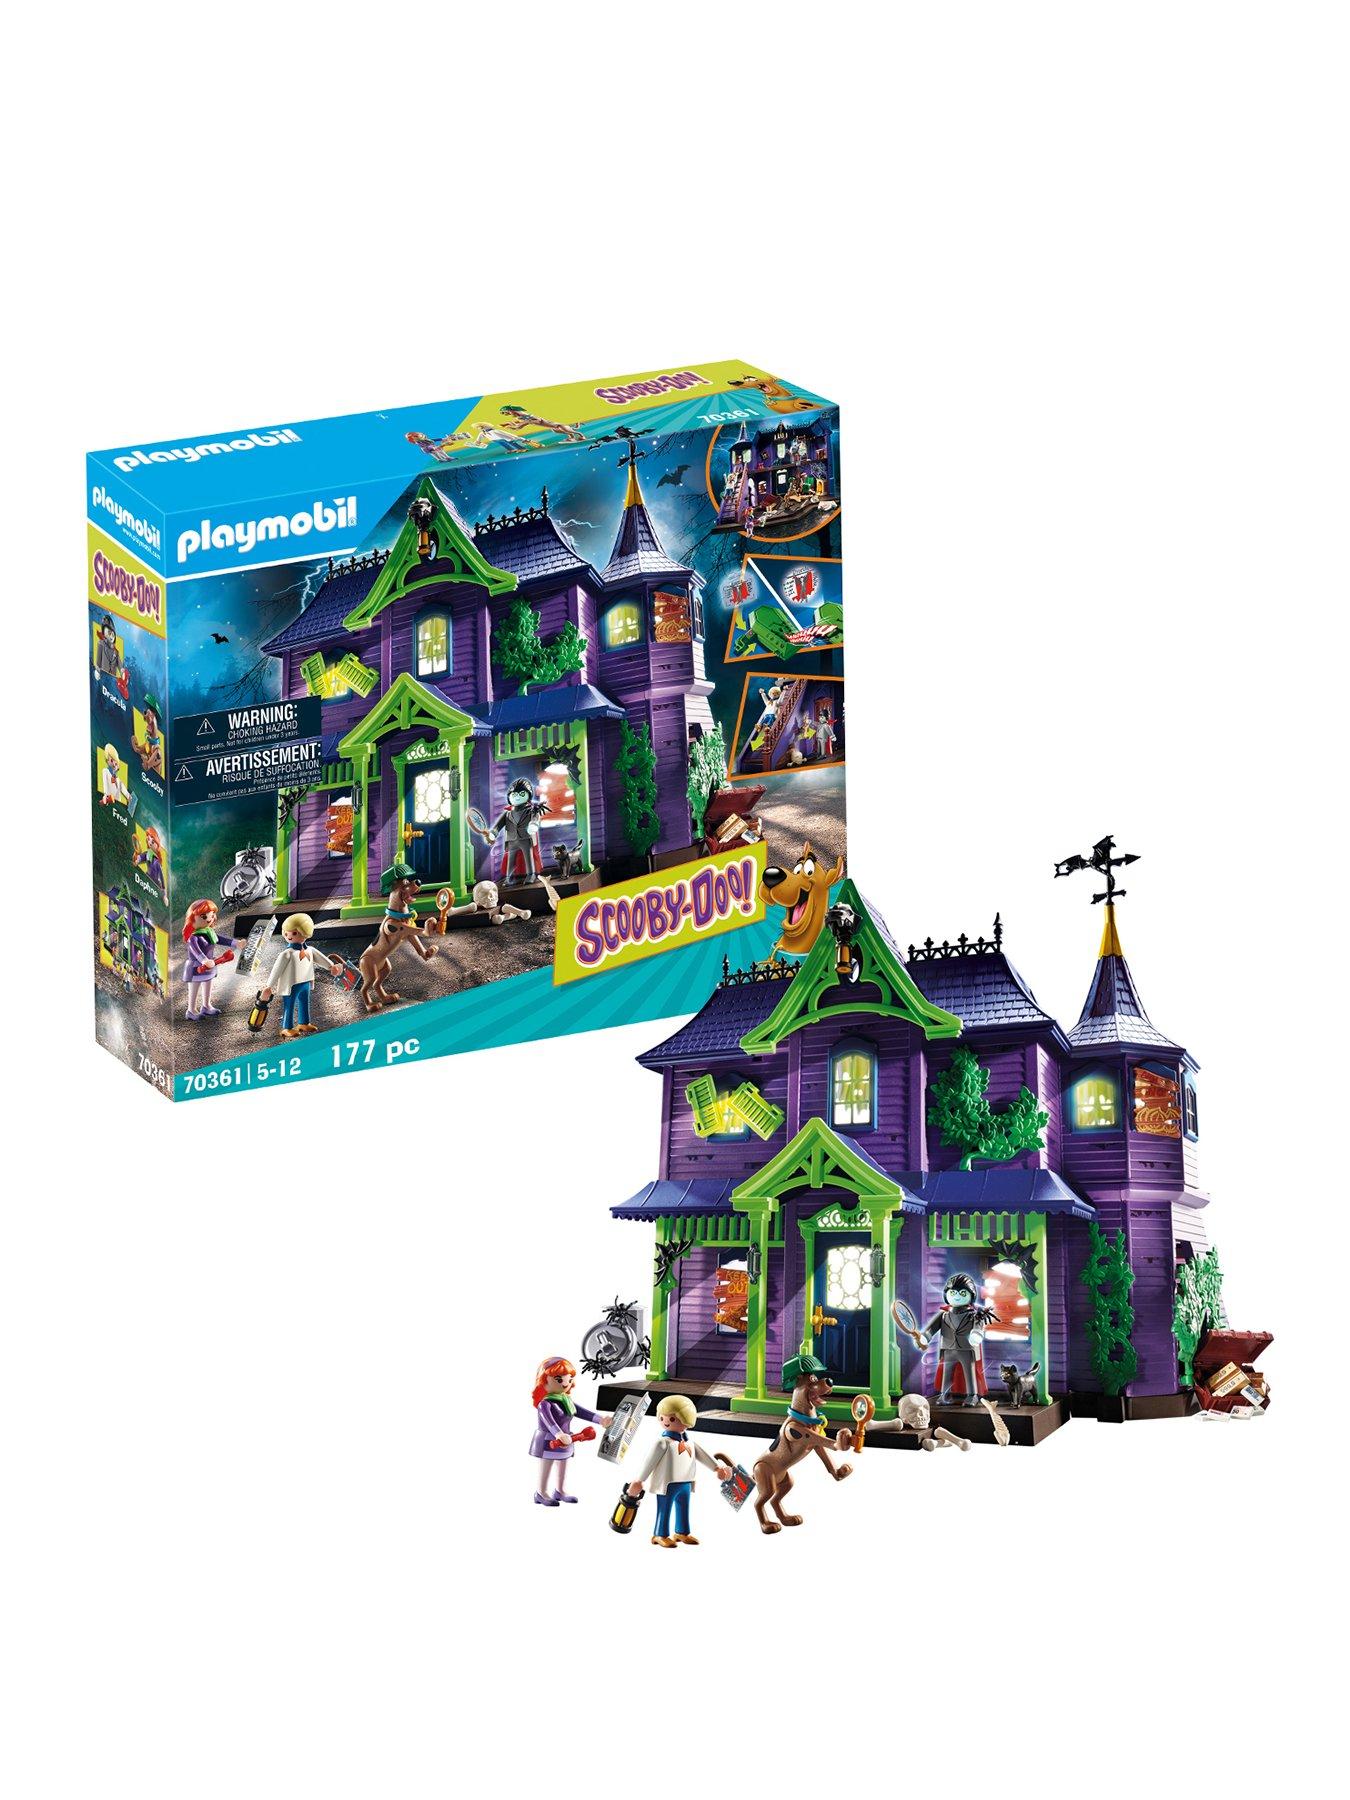 Scooby Doo PLAYMOBIL Mystery Haunted Mansion Series 2 Sets Review